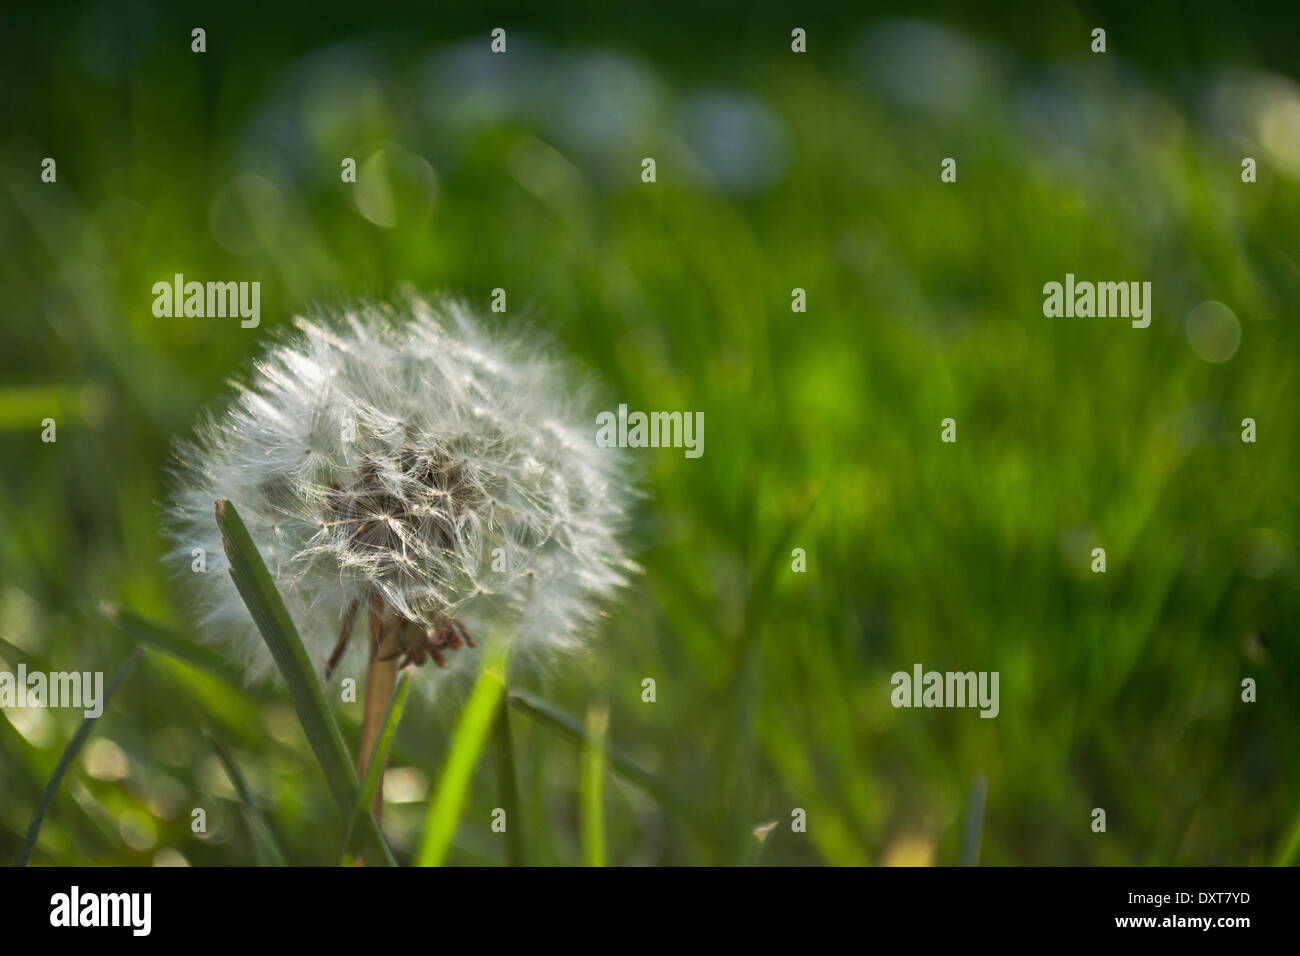 A dandelion/taraxacum in the grass on a bright day in Spring. The taraxacum is in the foreground surrounded by a green field. Stock Photo